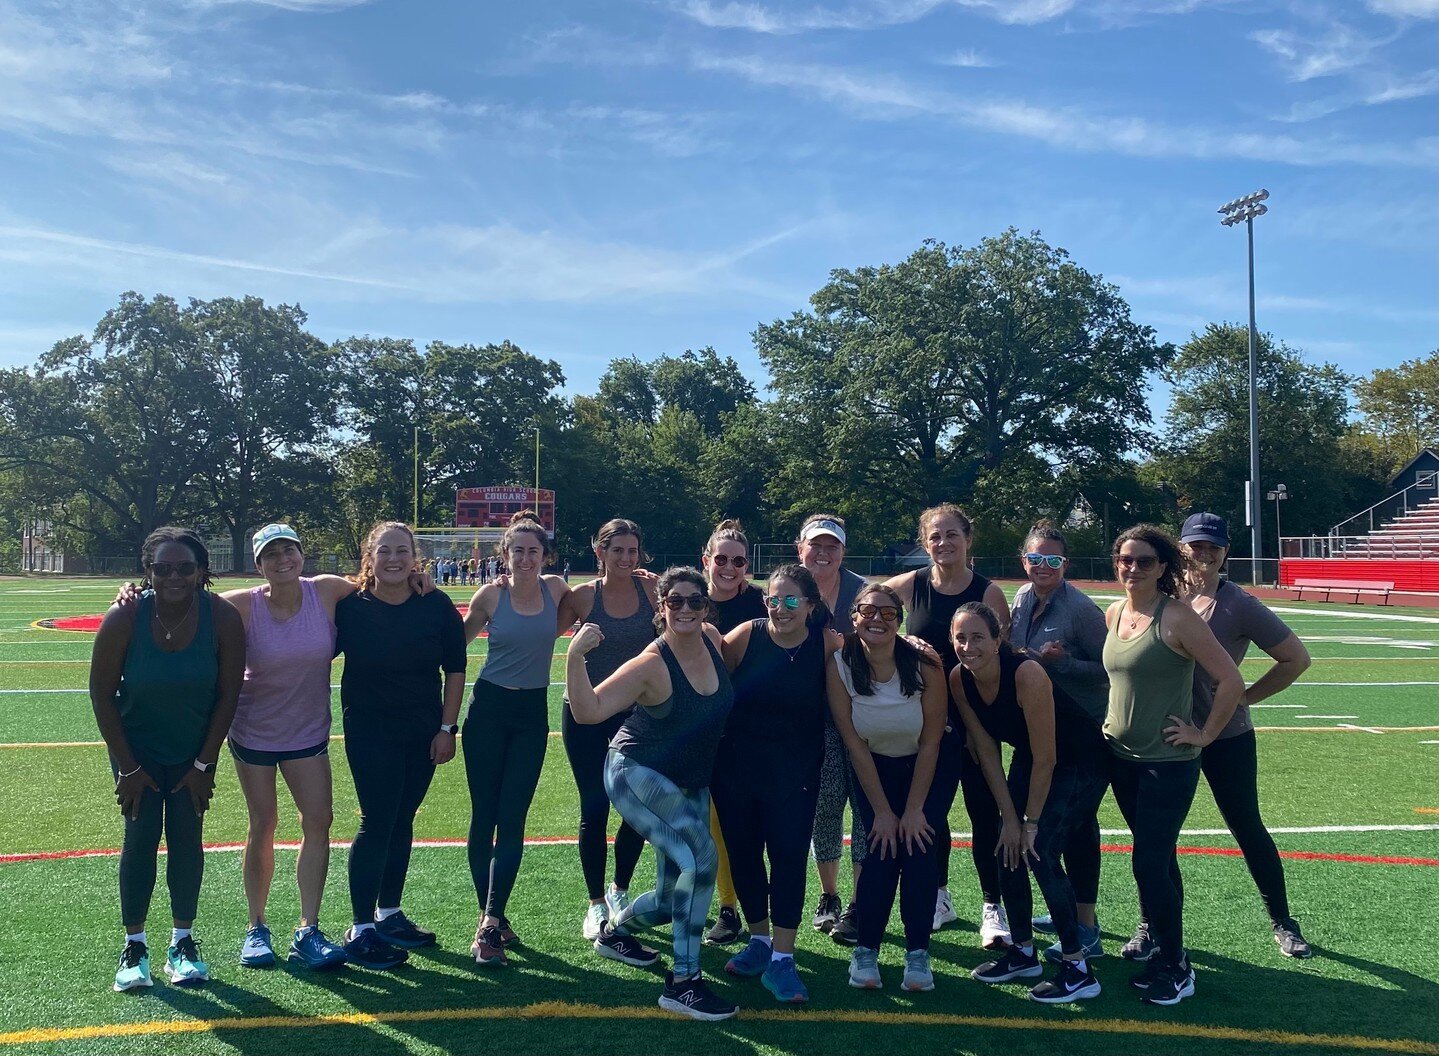 Spring Boot Camp Registration is OPEN 🥳

If you are looking for a community of women committed to getting stronger together, you&rsquo;ve found your place. 

We&rsquo;re a welcoming and supportive group at varying levels of fitness with a goal to mo